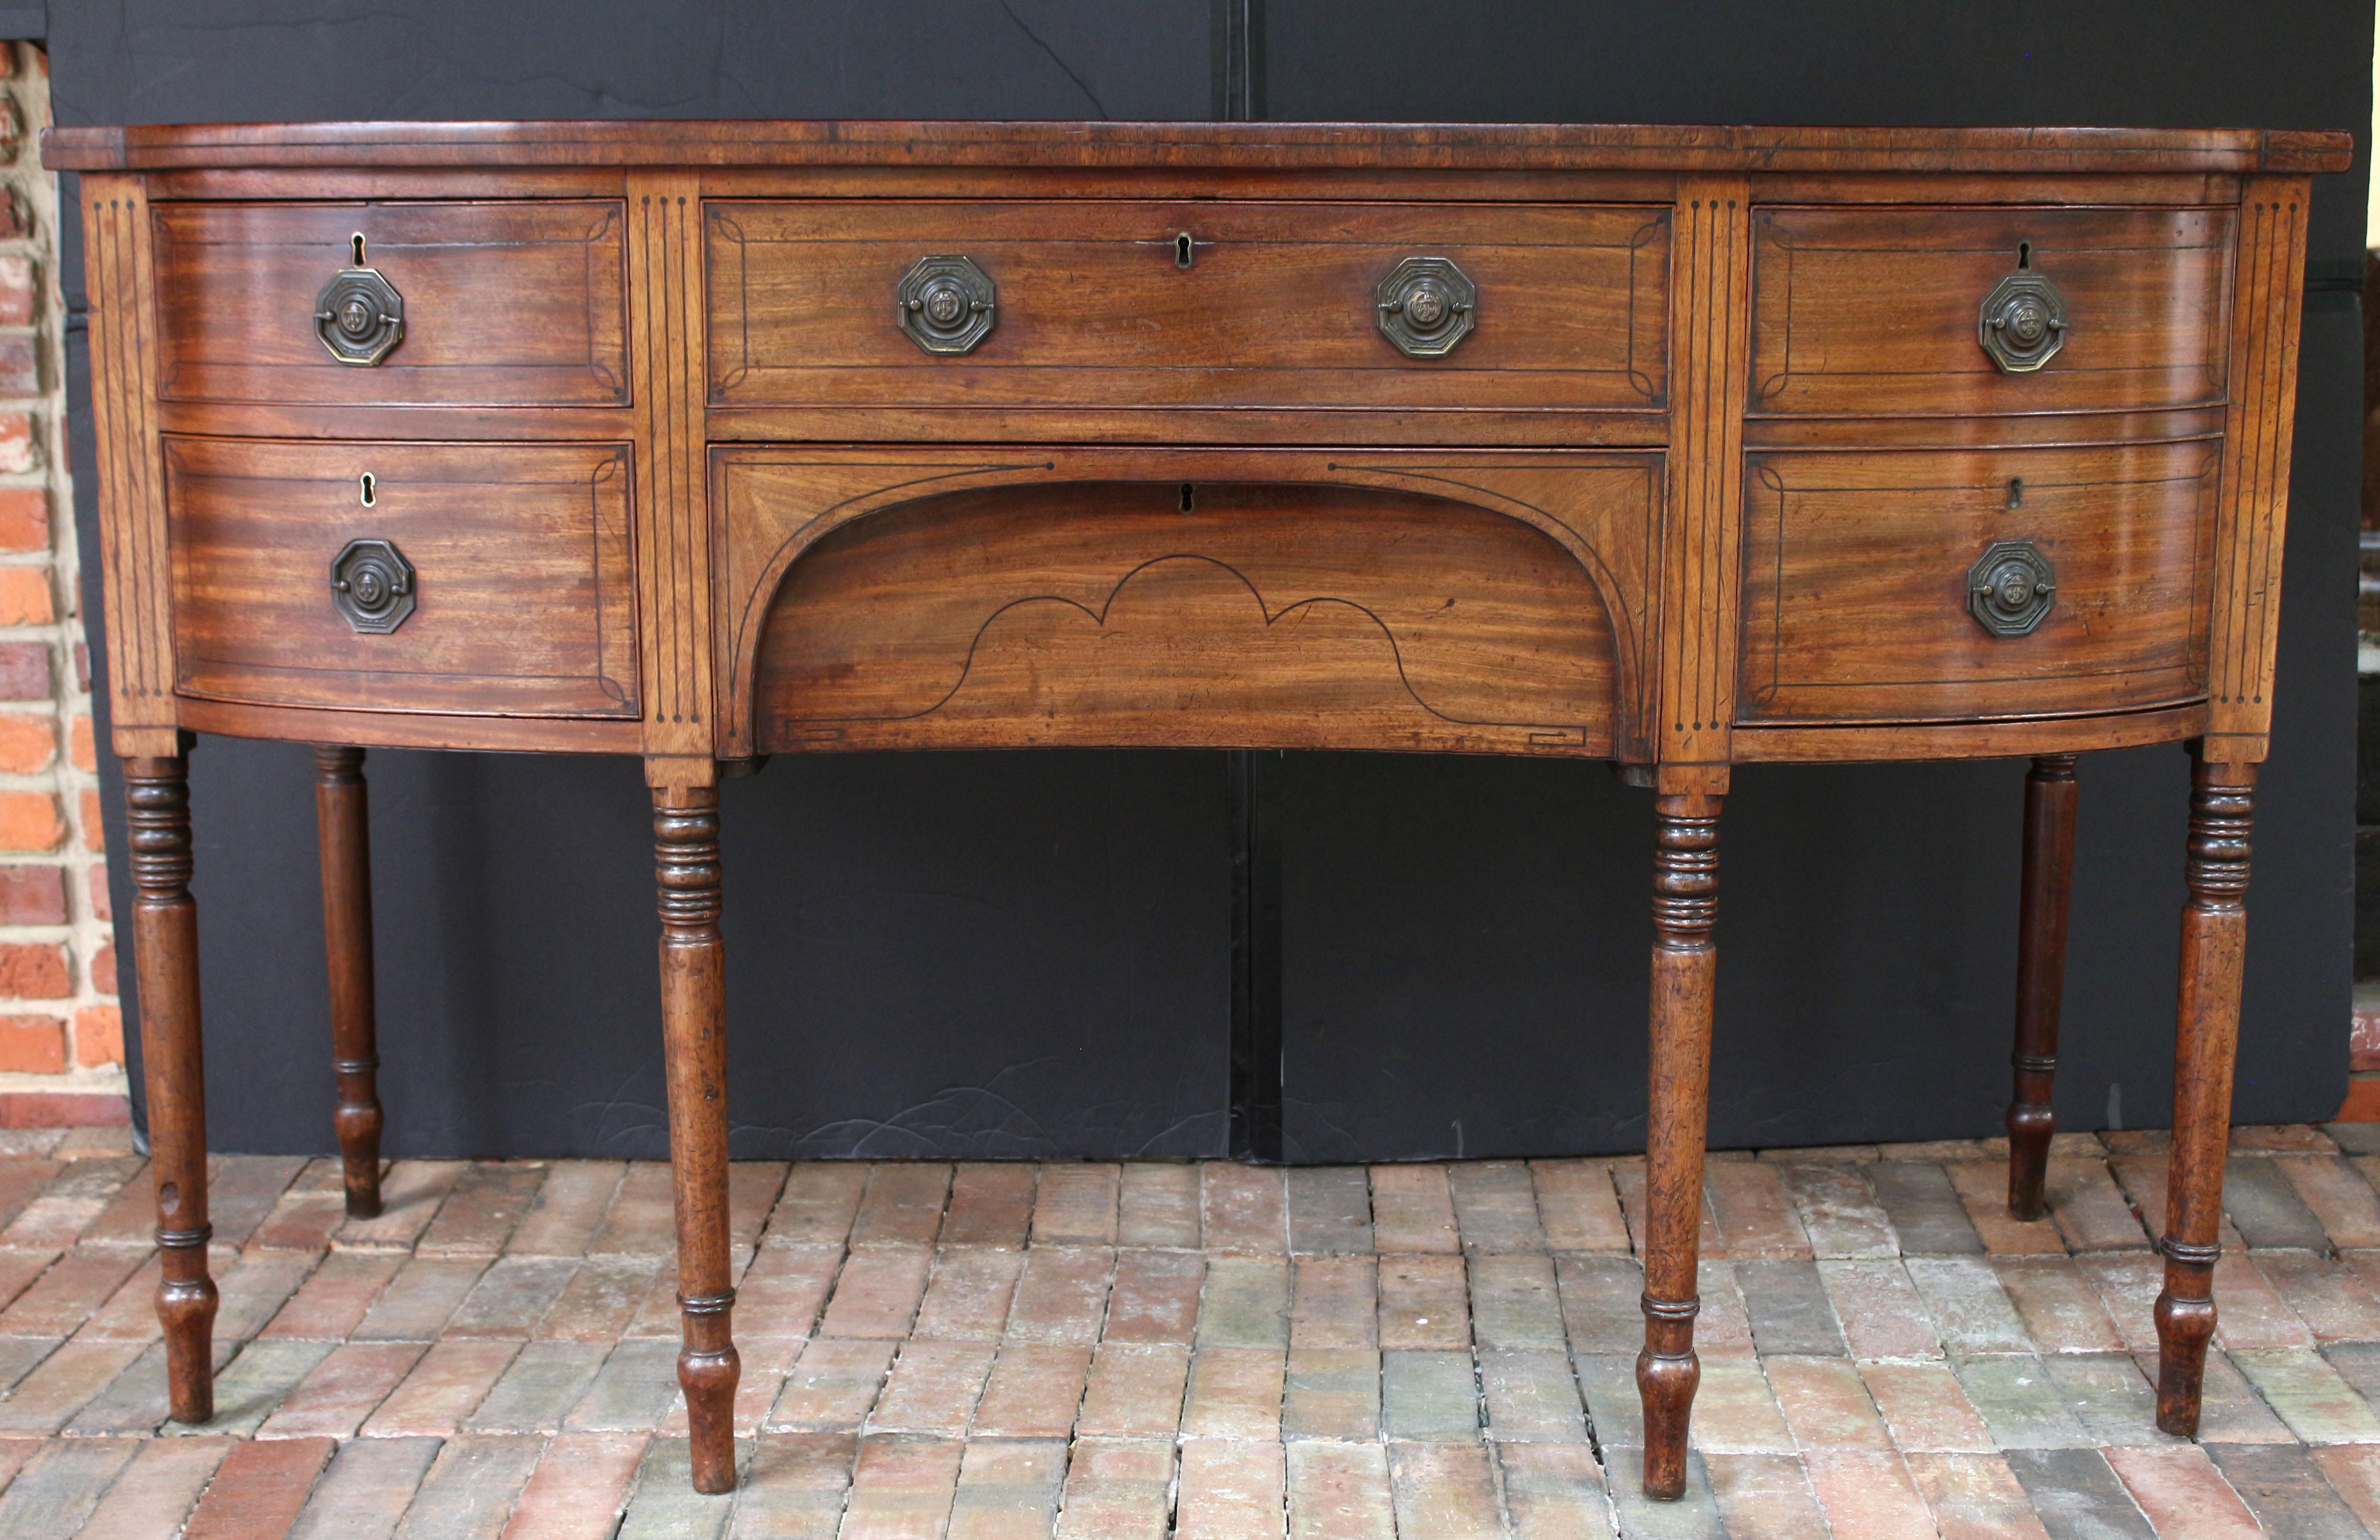 Circa 1800 Sheraton bowfront sideboard, English. Mahogany with decorative ebony line inlays across the drawer fronts, top edge, and surmounting each leg. Comprised of two long central drawer, one appearing as an apron, flanked by a deep drawer